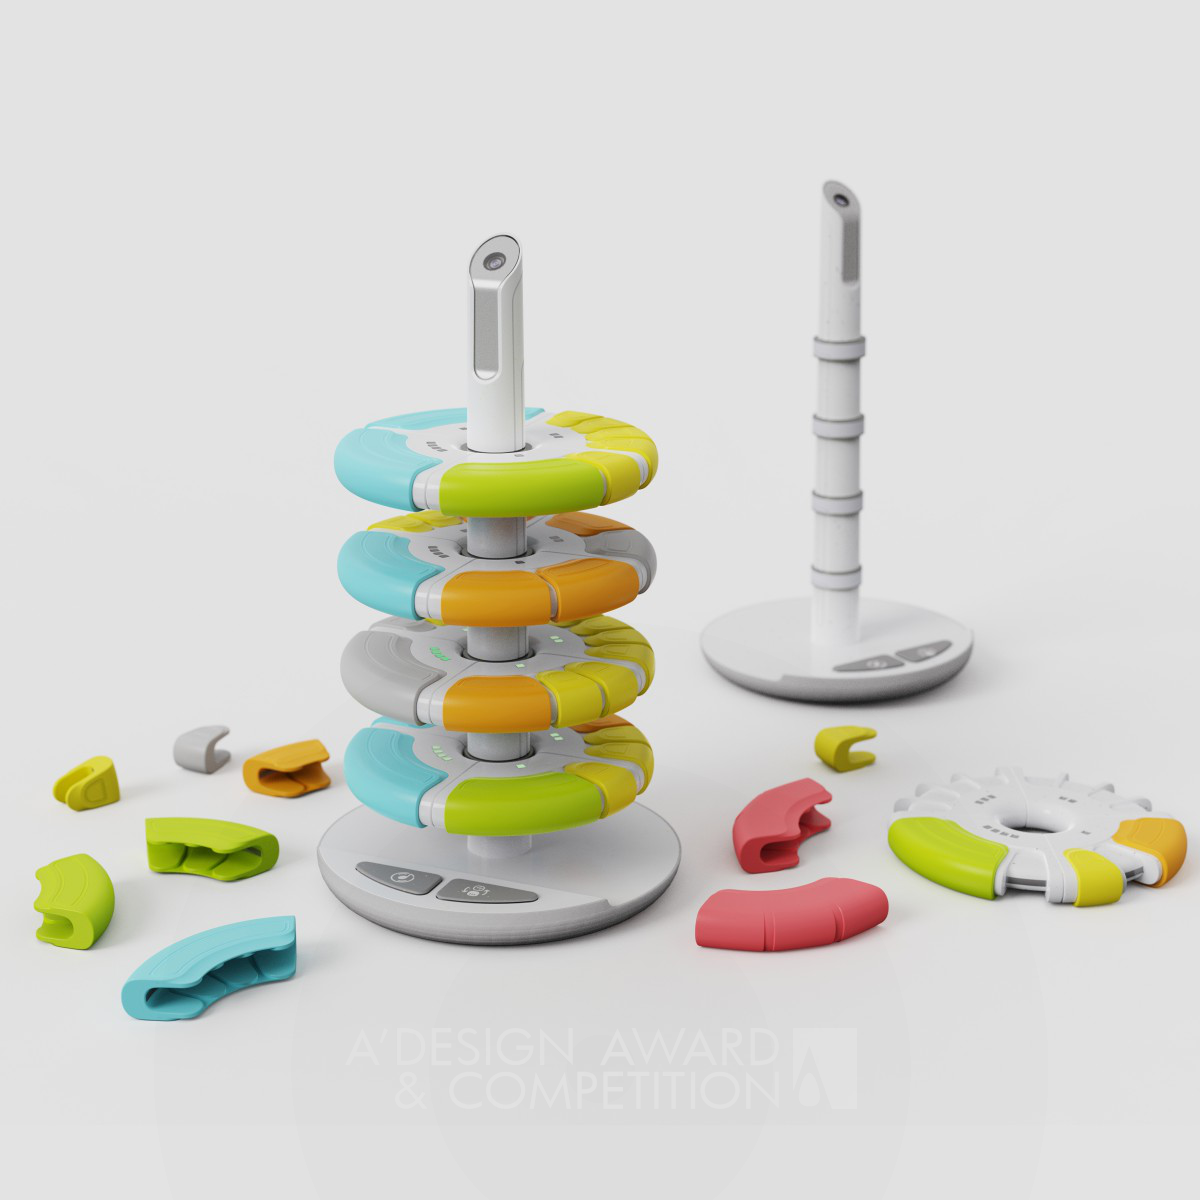 Zhou Leijing wins Iron at the prestigious A' Toys, Games and Hobby Products Design Award with Poly Beat Rhythm Exercises Toy.